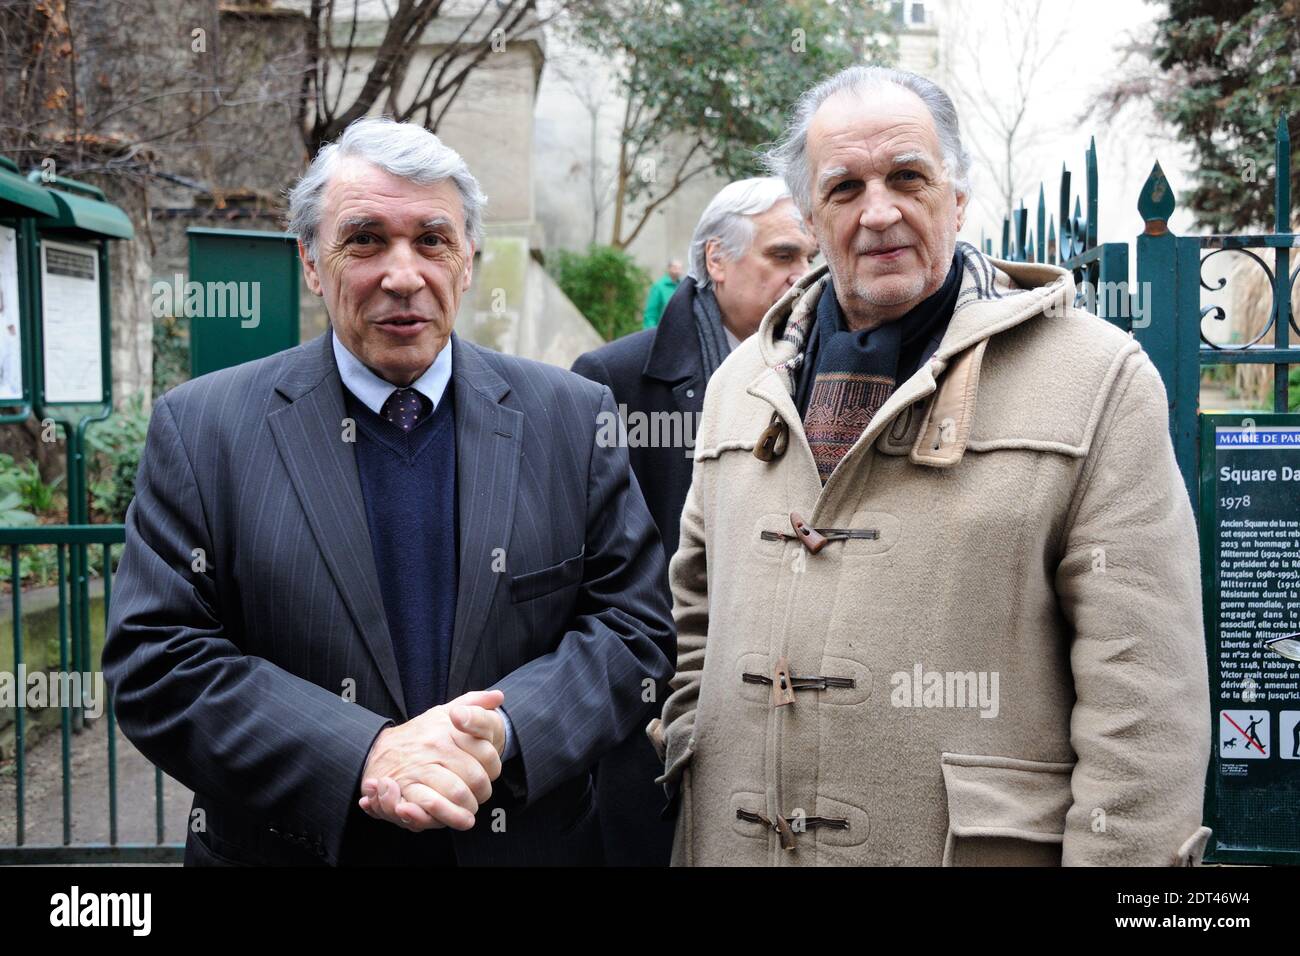 Gilbert Mitterrand and Jean-Christophe Mitterrand attending a tree planting  ceremony to pay tribute to Danielle Mitterrand, the late wife of France's  president Francois Mitterrand, at Square Danielle Mitterrand public garden  in Paris,